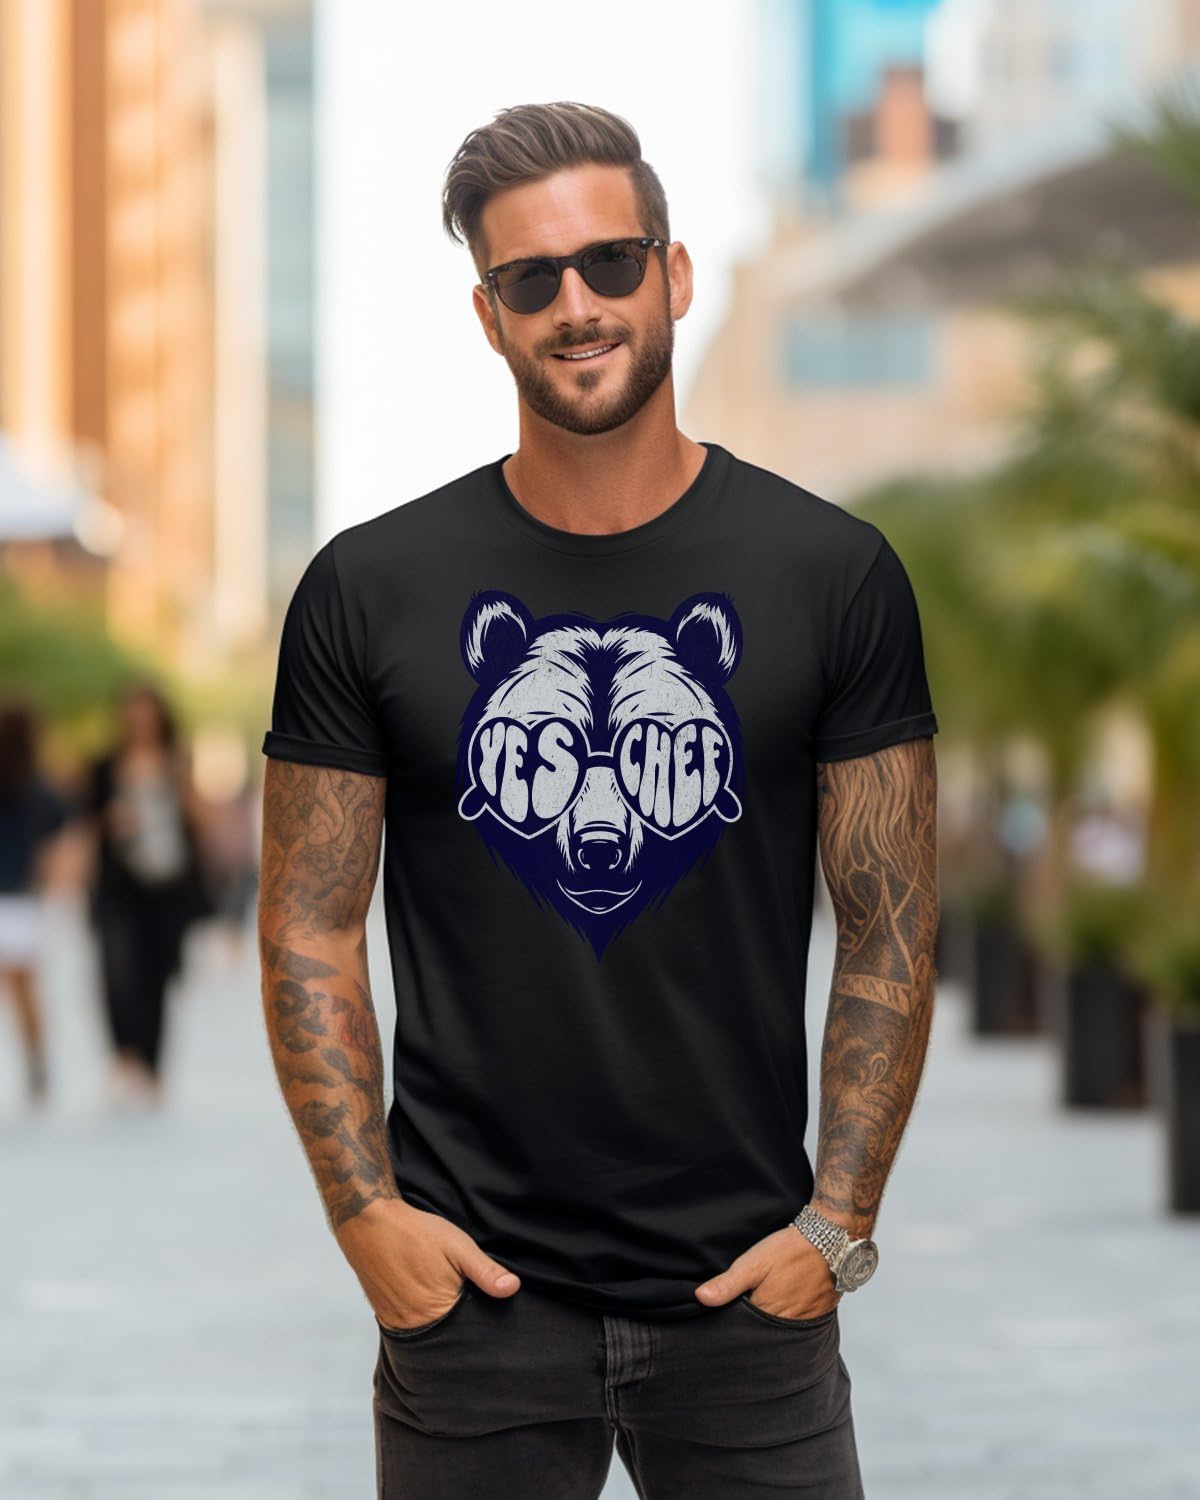 Bear Yes Chef Shirt, Gift, Cook, Chef